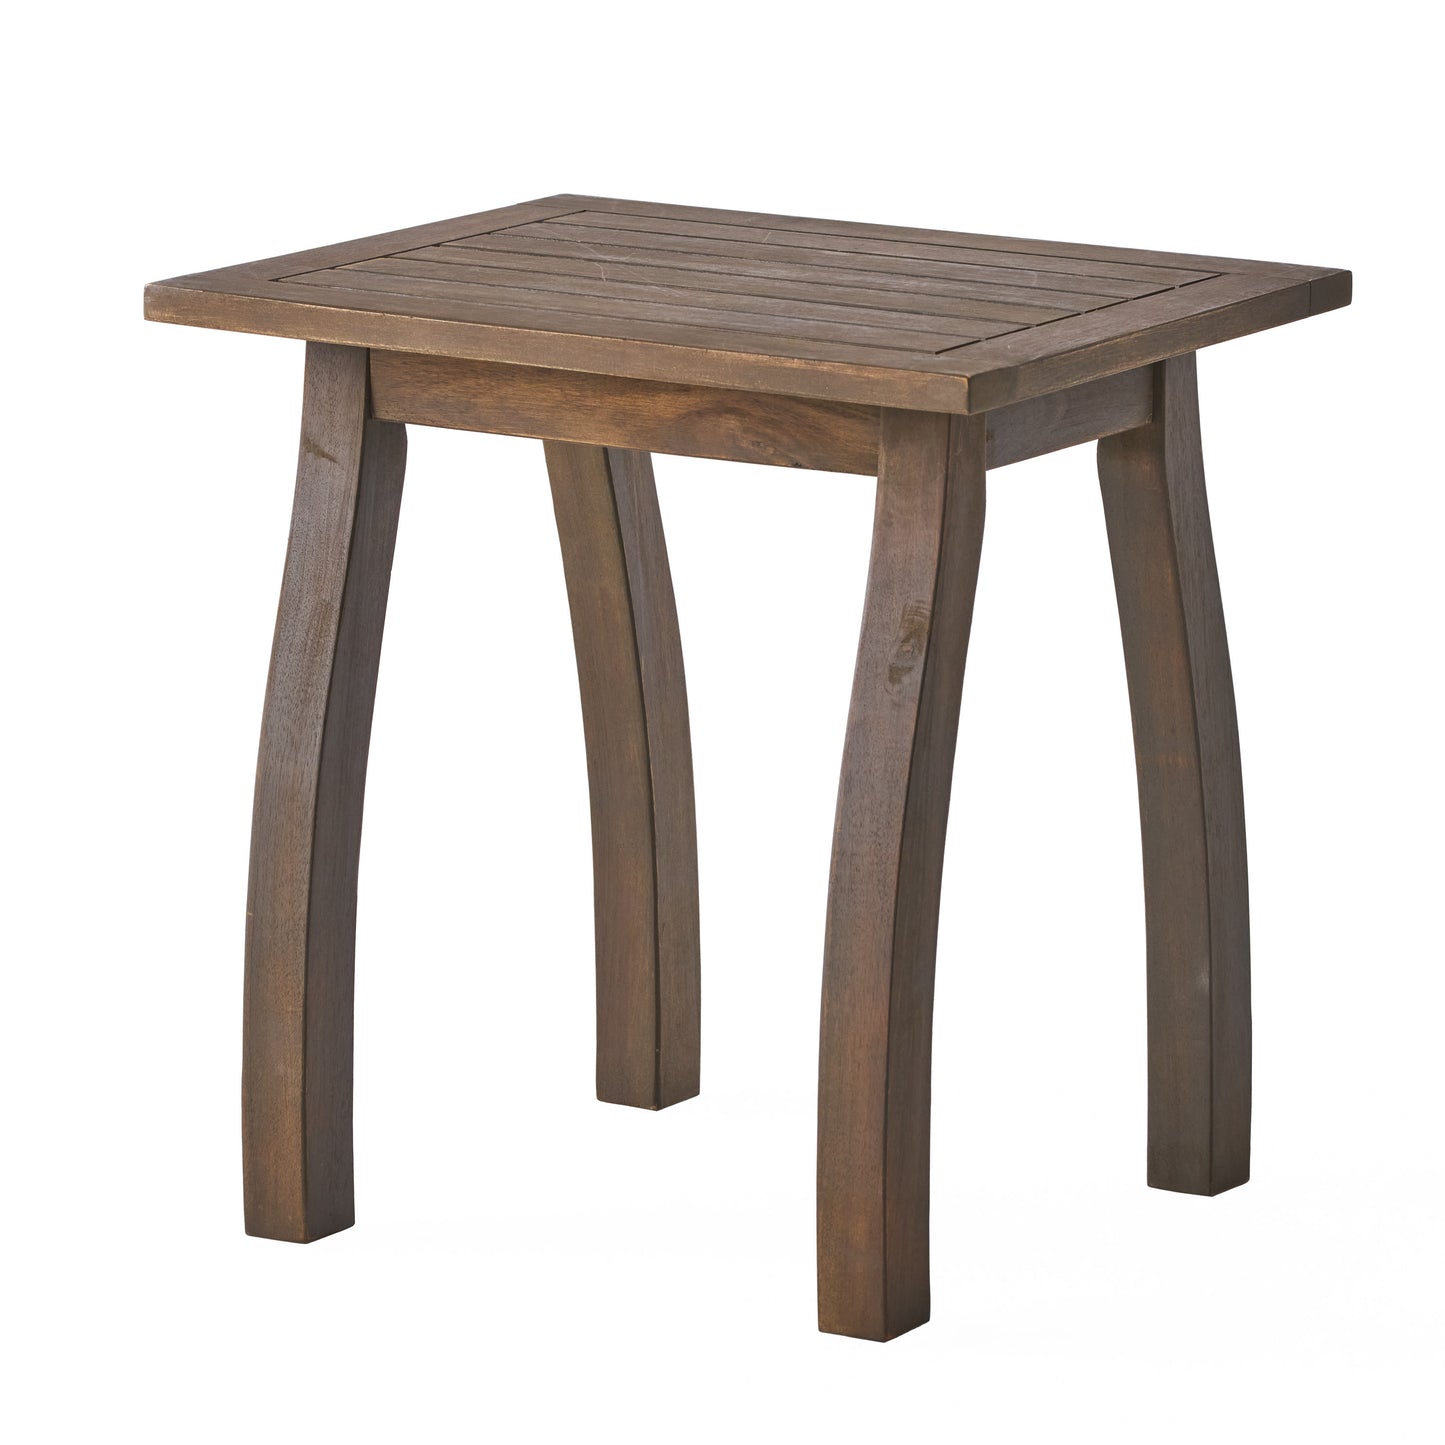 Sadie Outdoor Acacia Wood Accent Table, Gray Finish